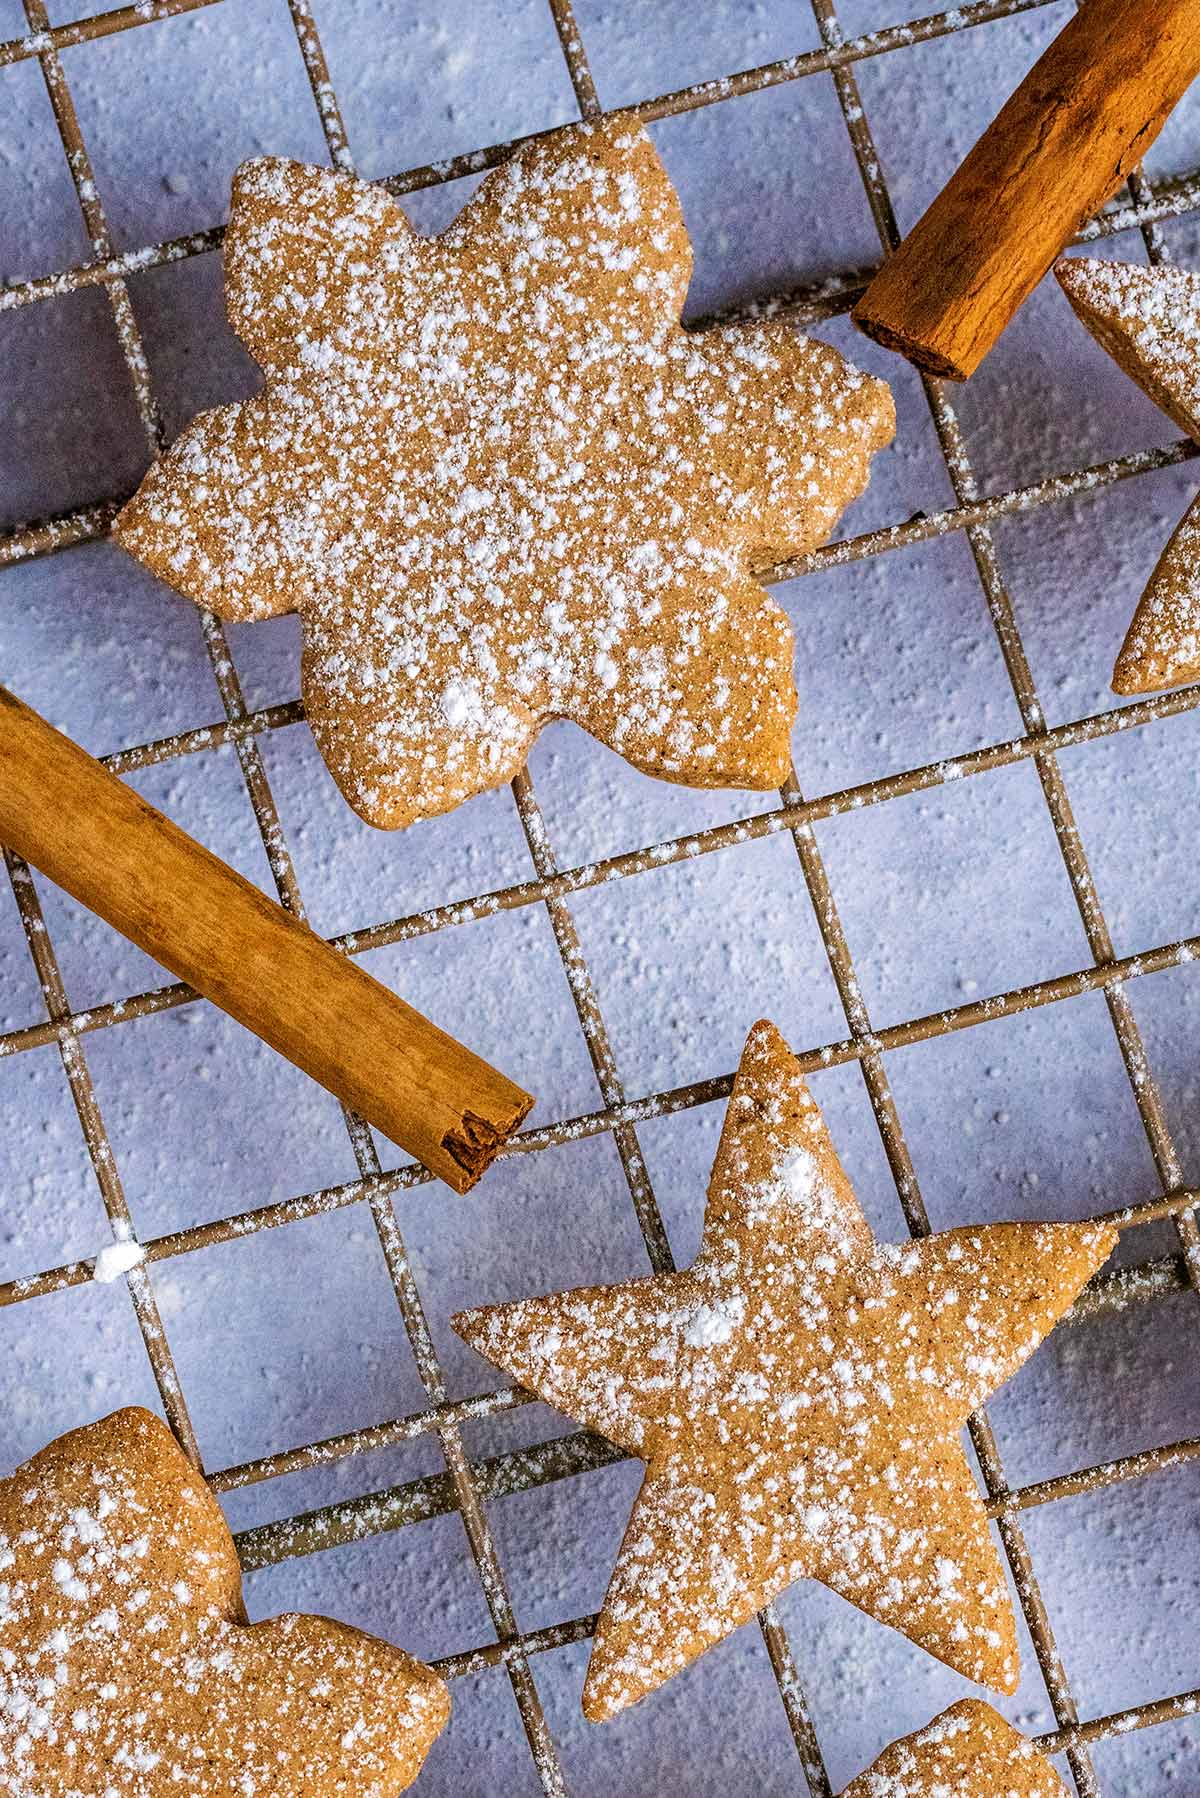 Star shaped biscuits dusted with icing sugar.